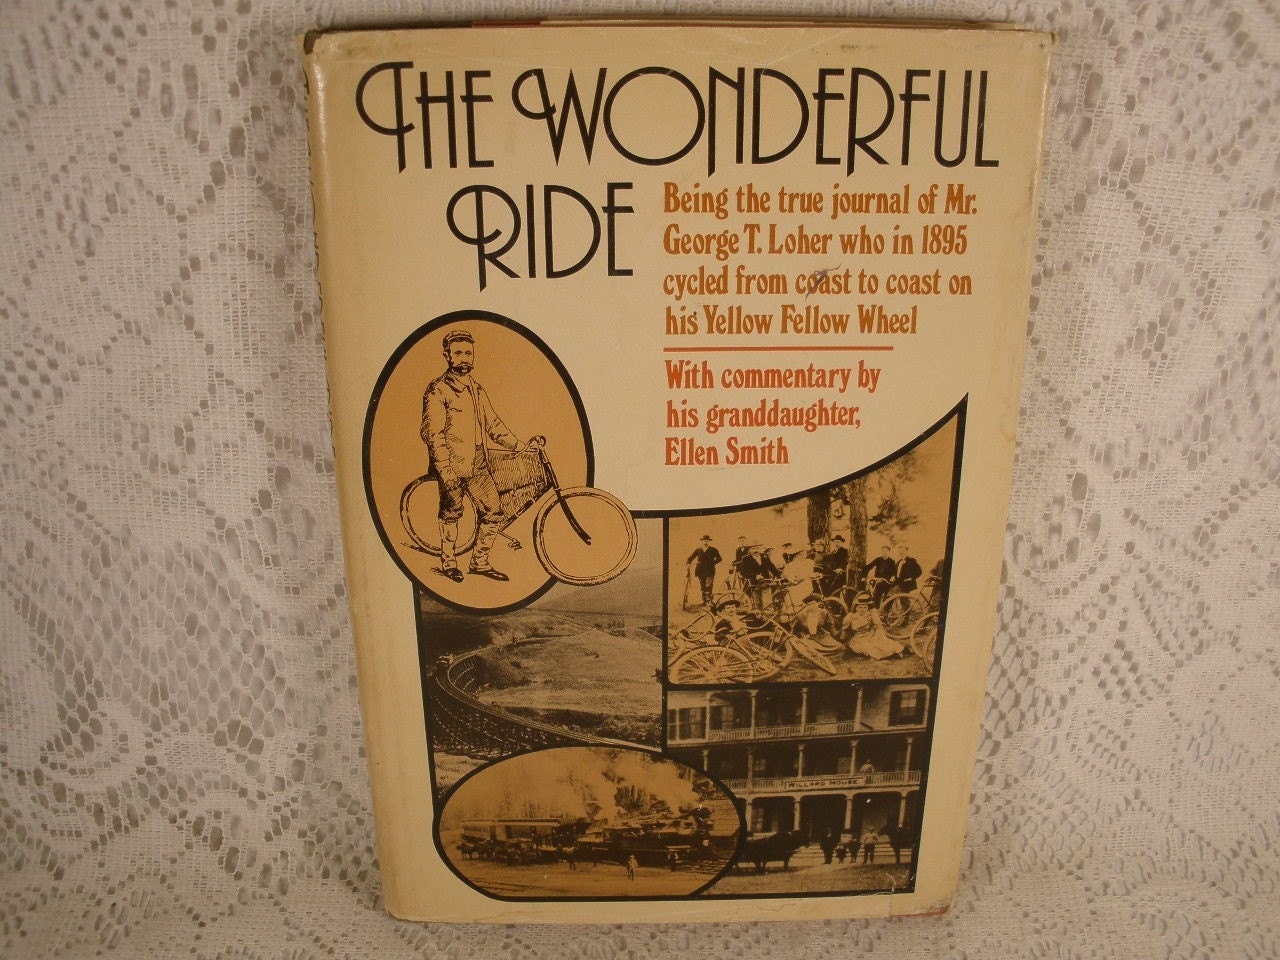 The wonderful ride: Being the true journal of Mr. George T. Loher who in 1895 cycled from coast to coast on his Yellow Fellow wheel George T. Loher